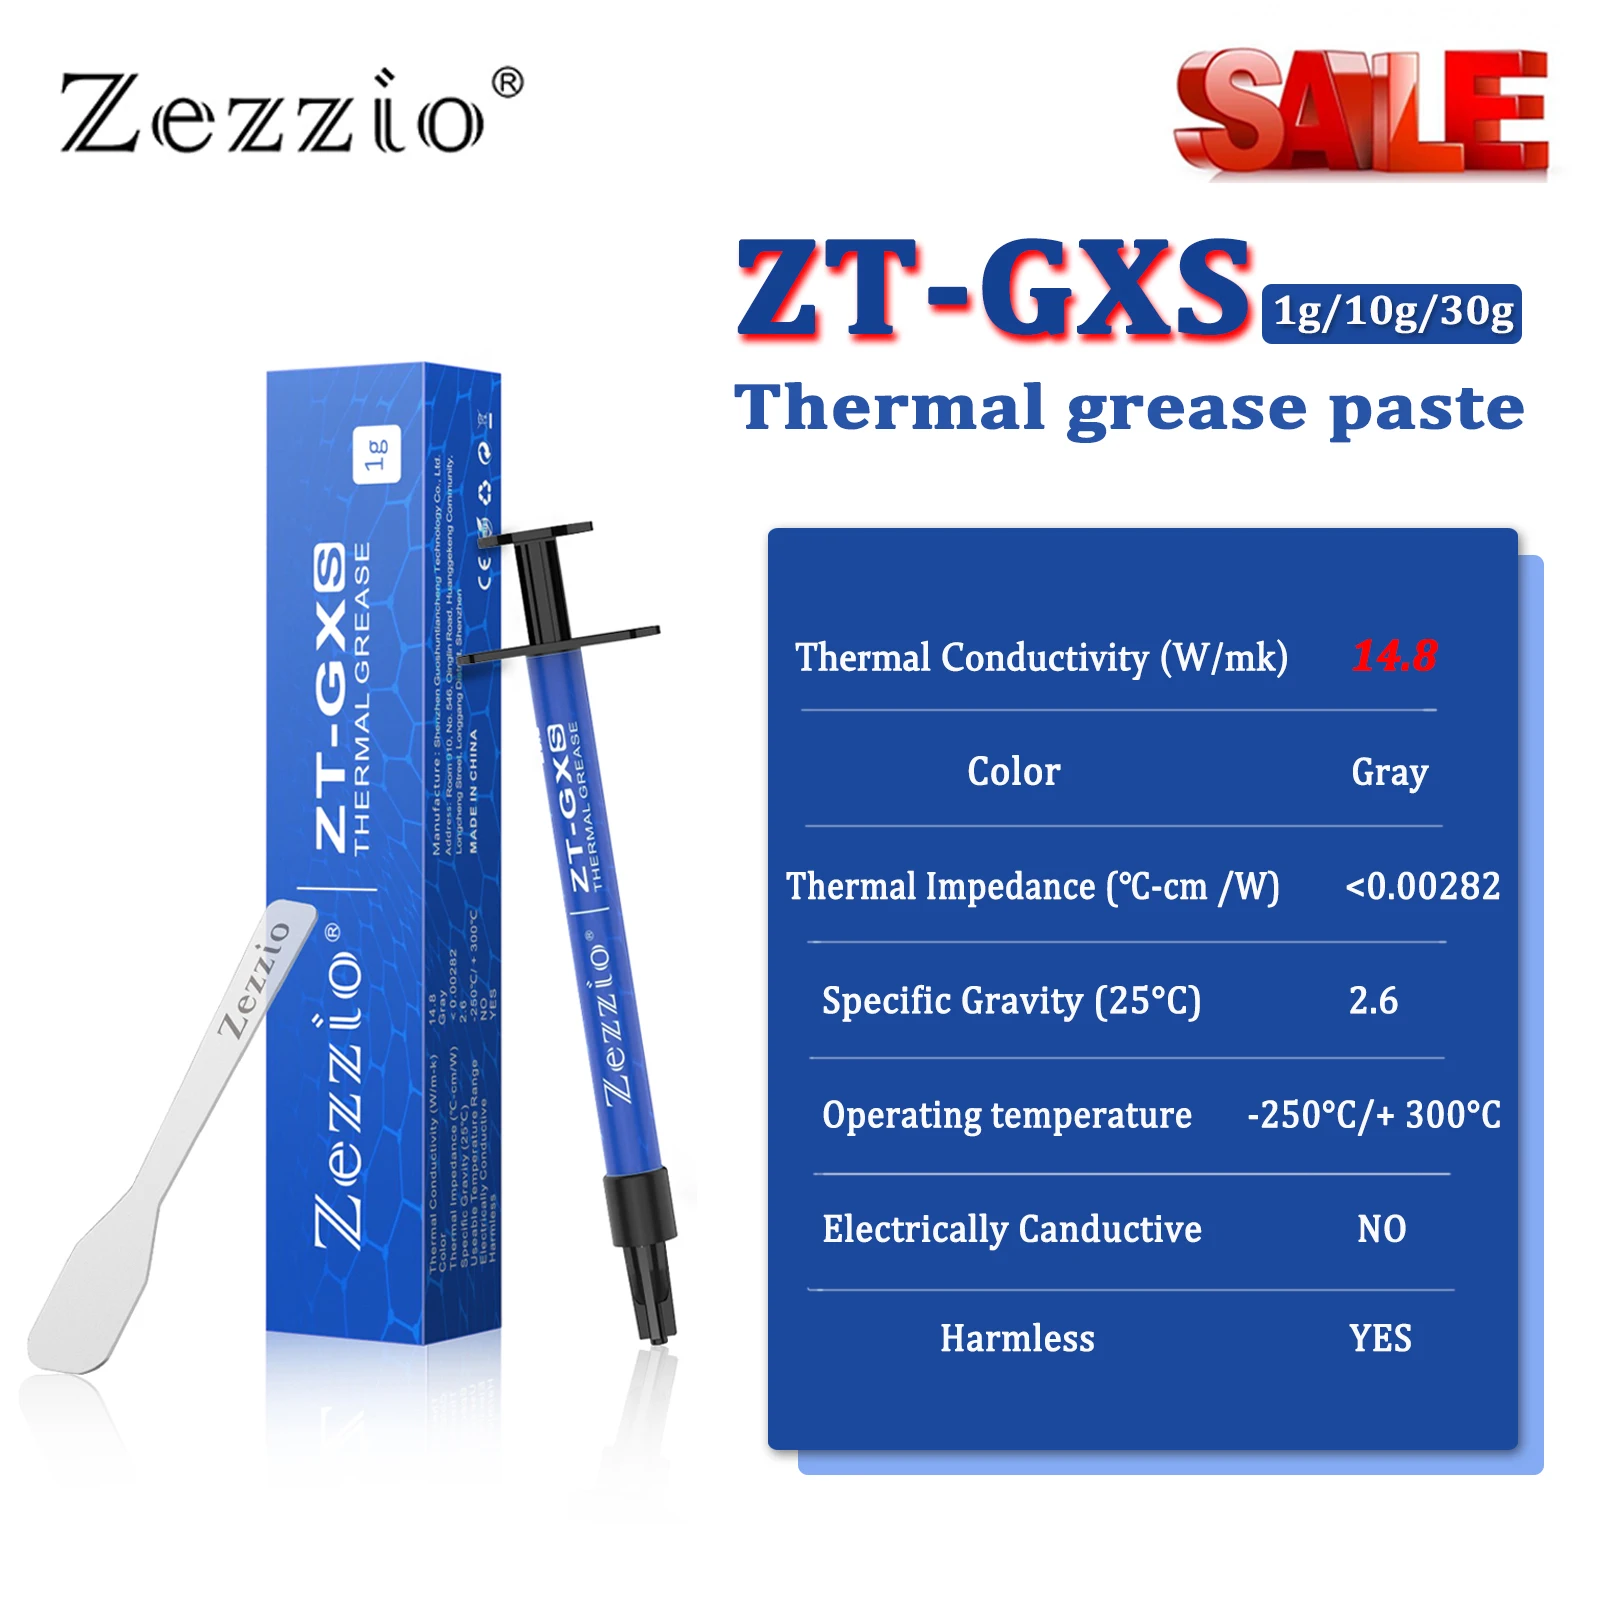 Zezzio ZT-GXS Thermal Paste 14.8W/mk Conductive Silicone Grease 1/10/30g Graphics Card Cooling Paste GPU CPU Notebook thermal